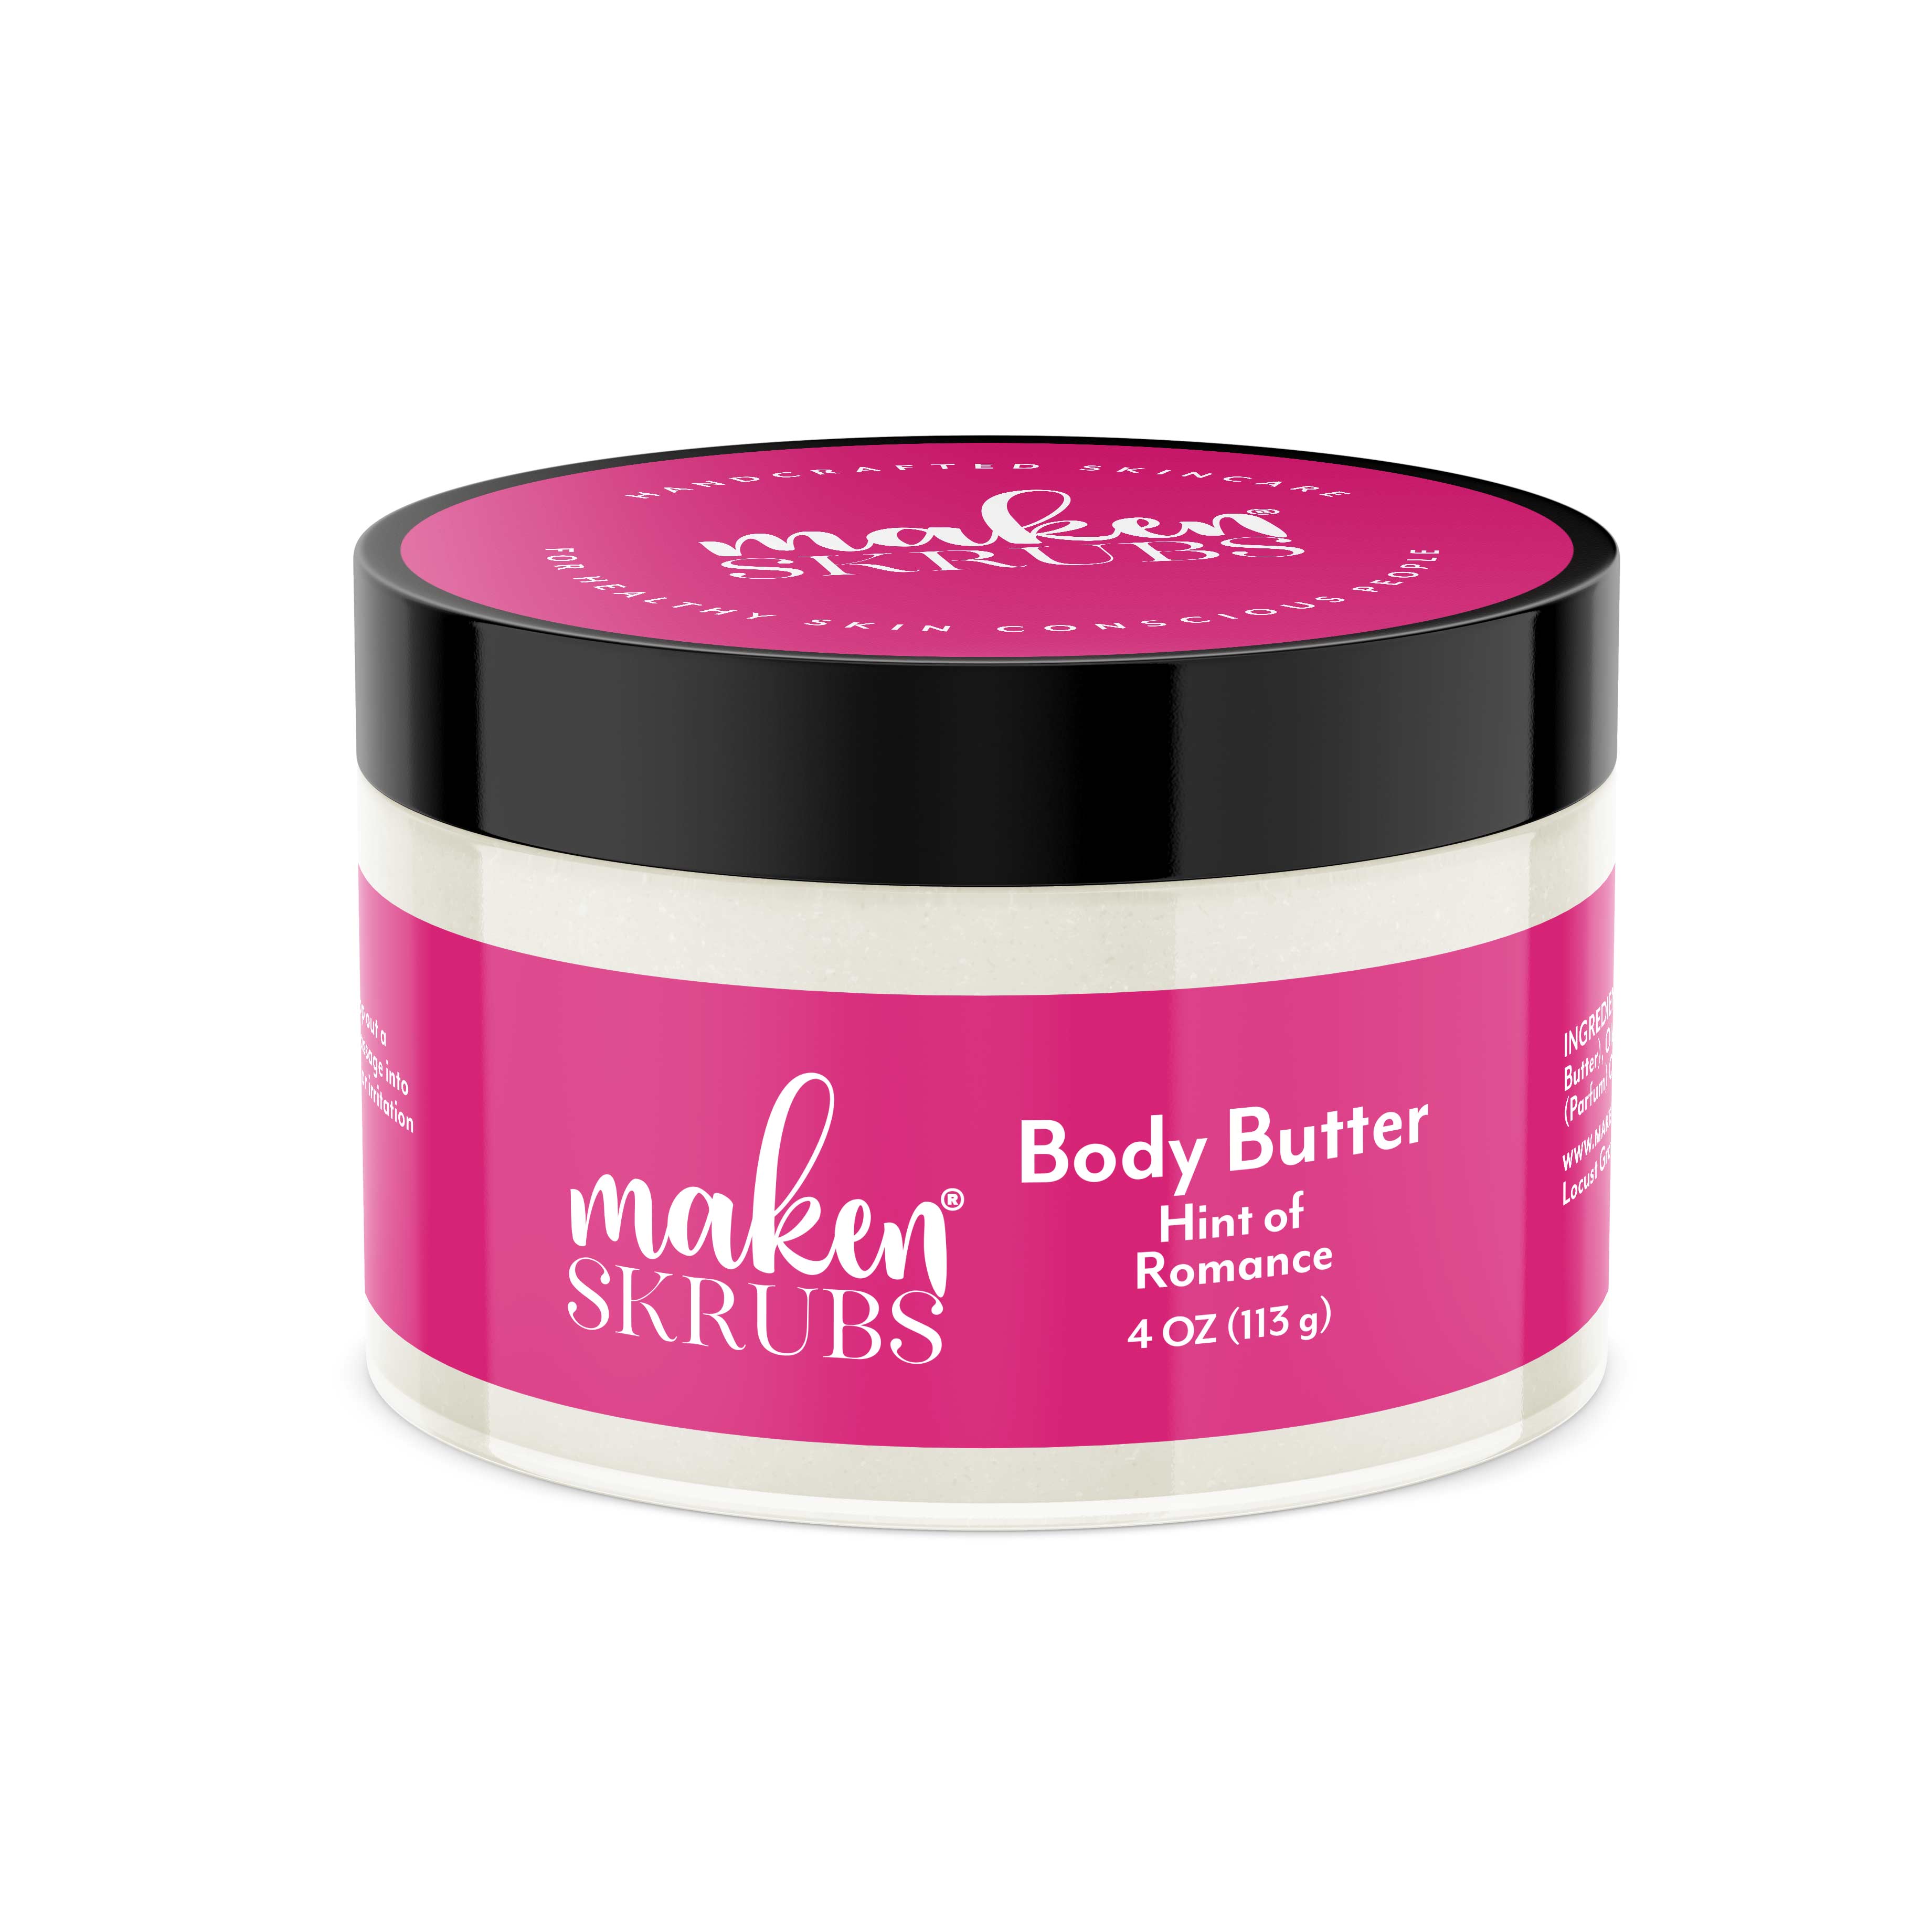 Hint of Romance Whipped Body Butter